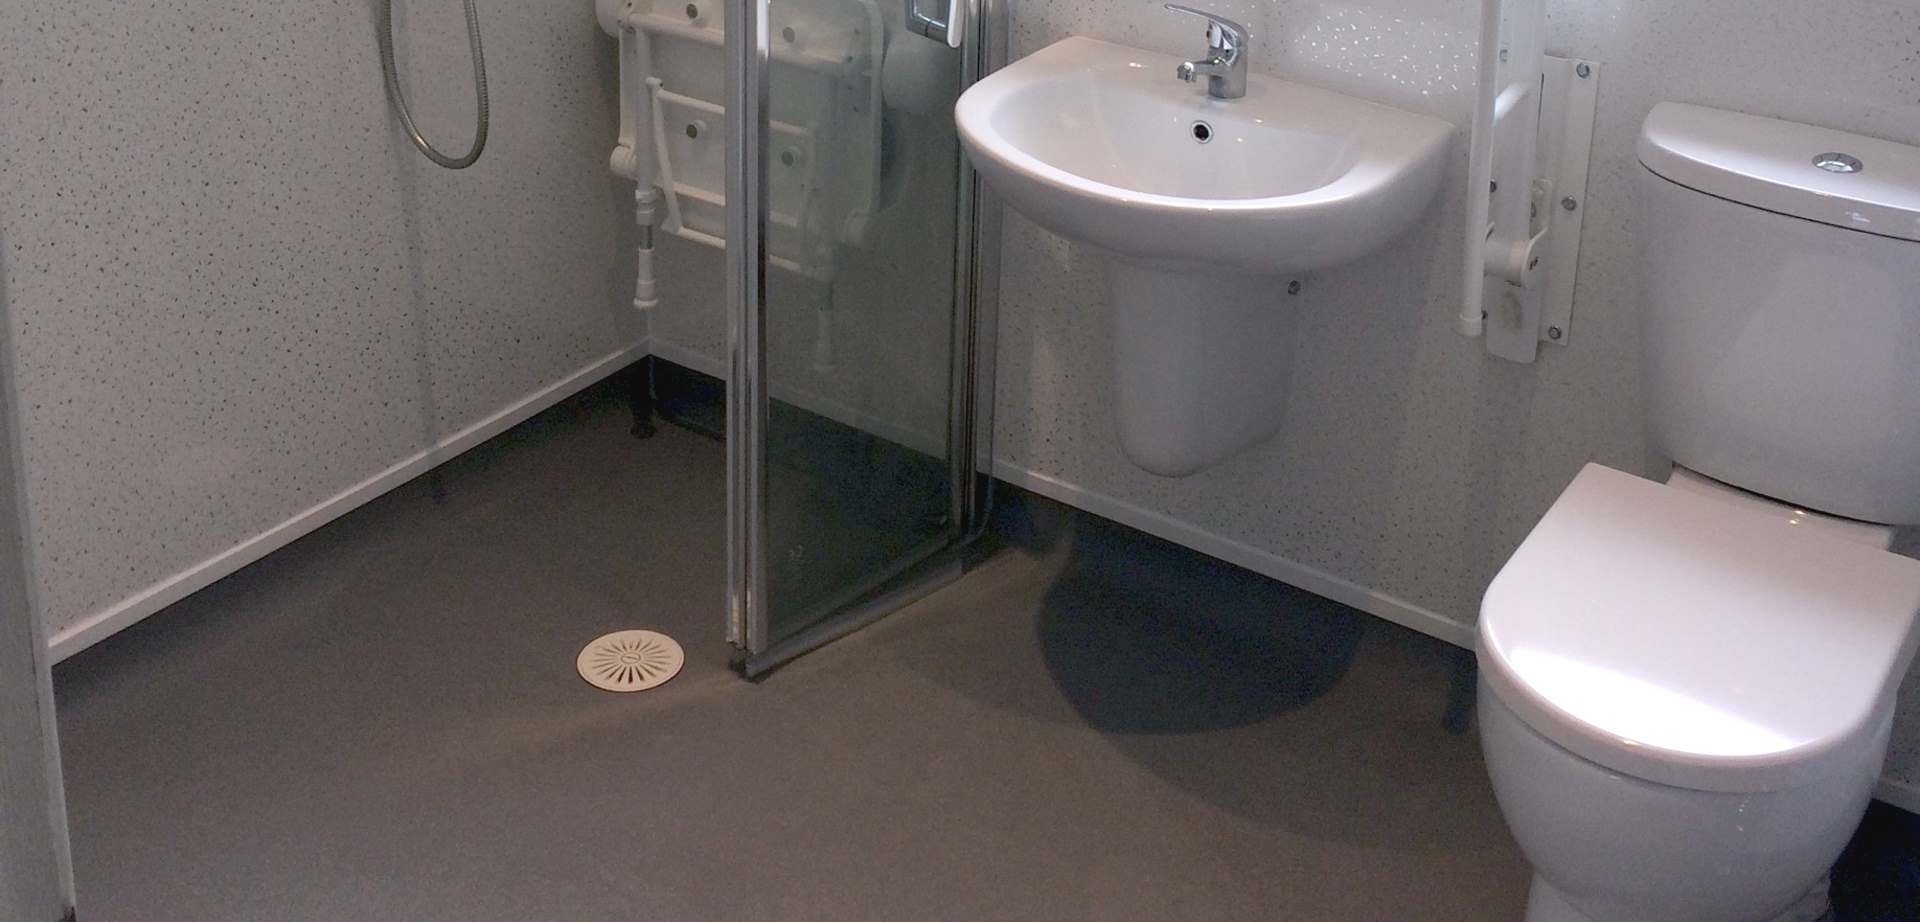 Wetroom Installers in Nuneaton and The Midlands